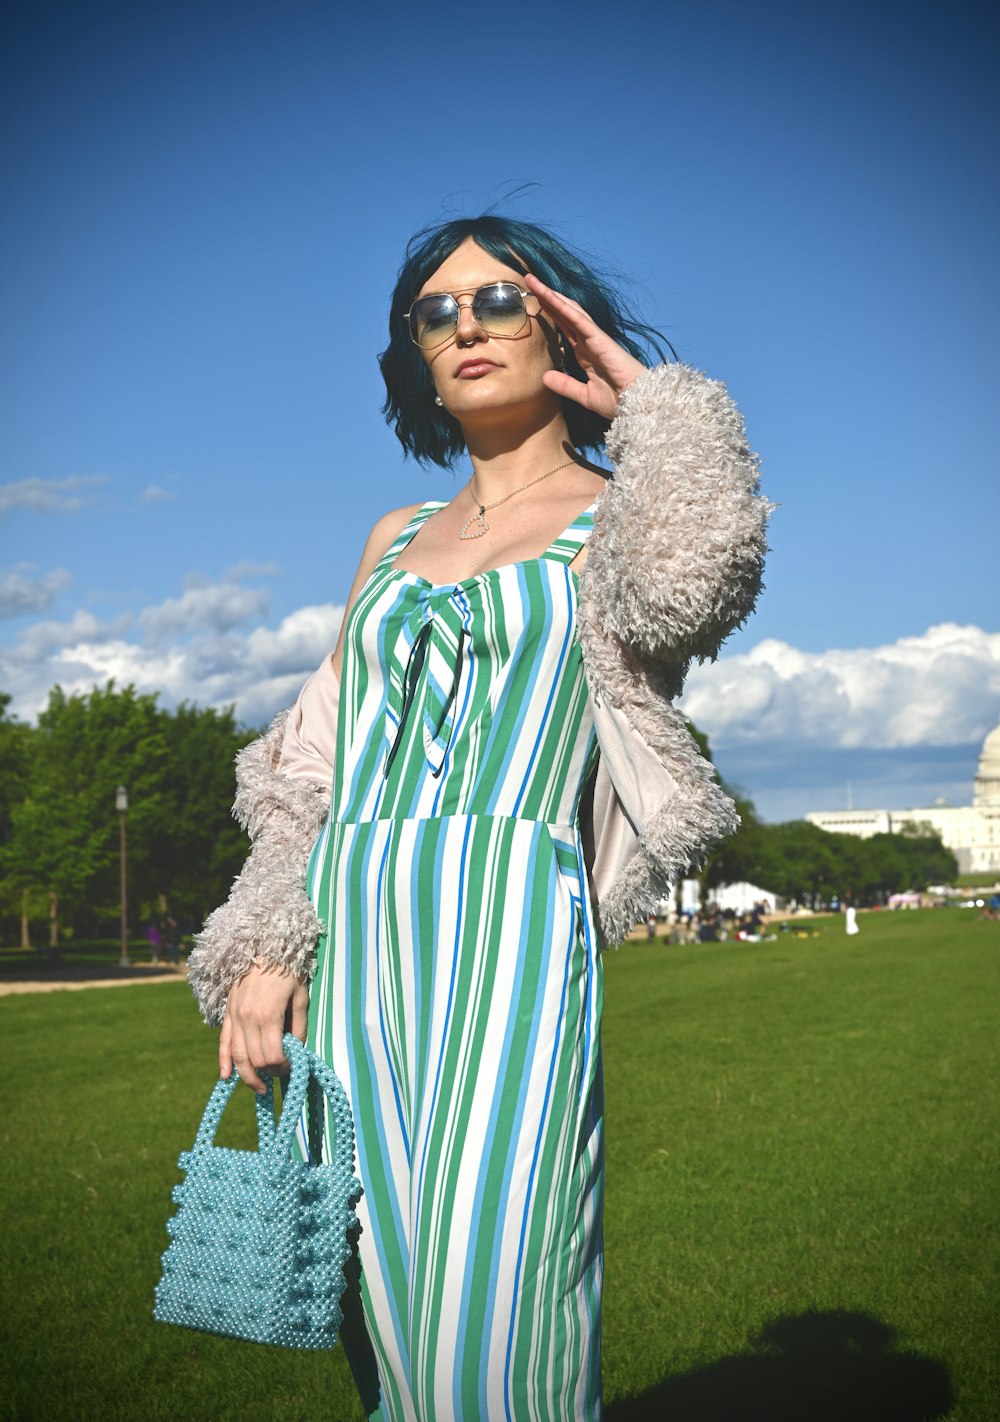 woman in white and green dress wearing black sunglasses standing on green grass field during daytime